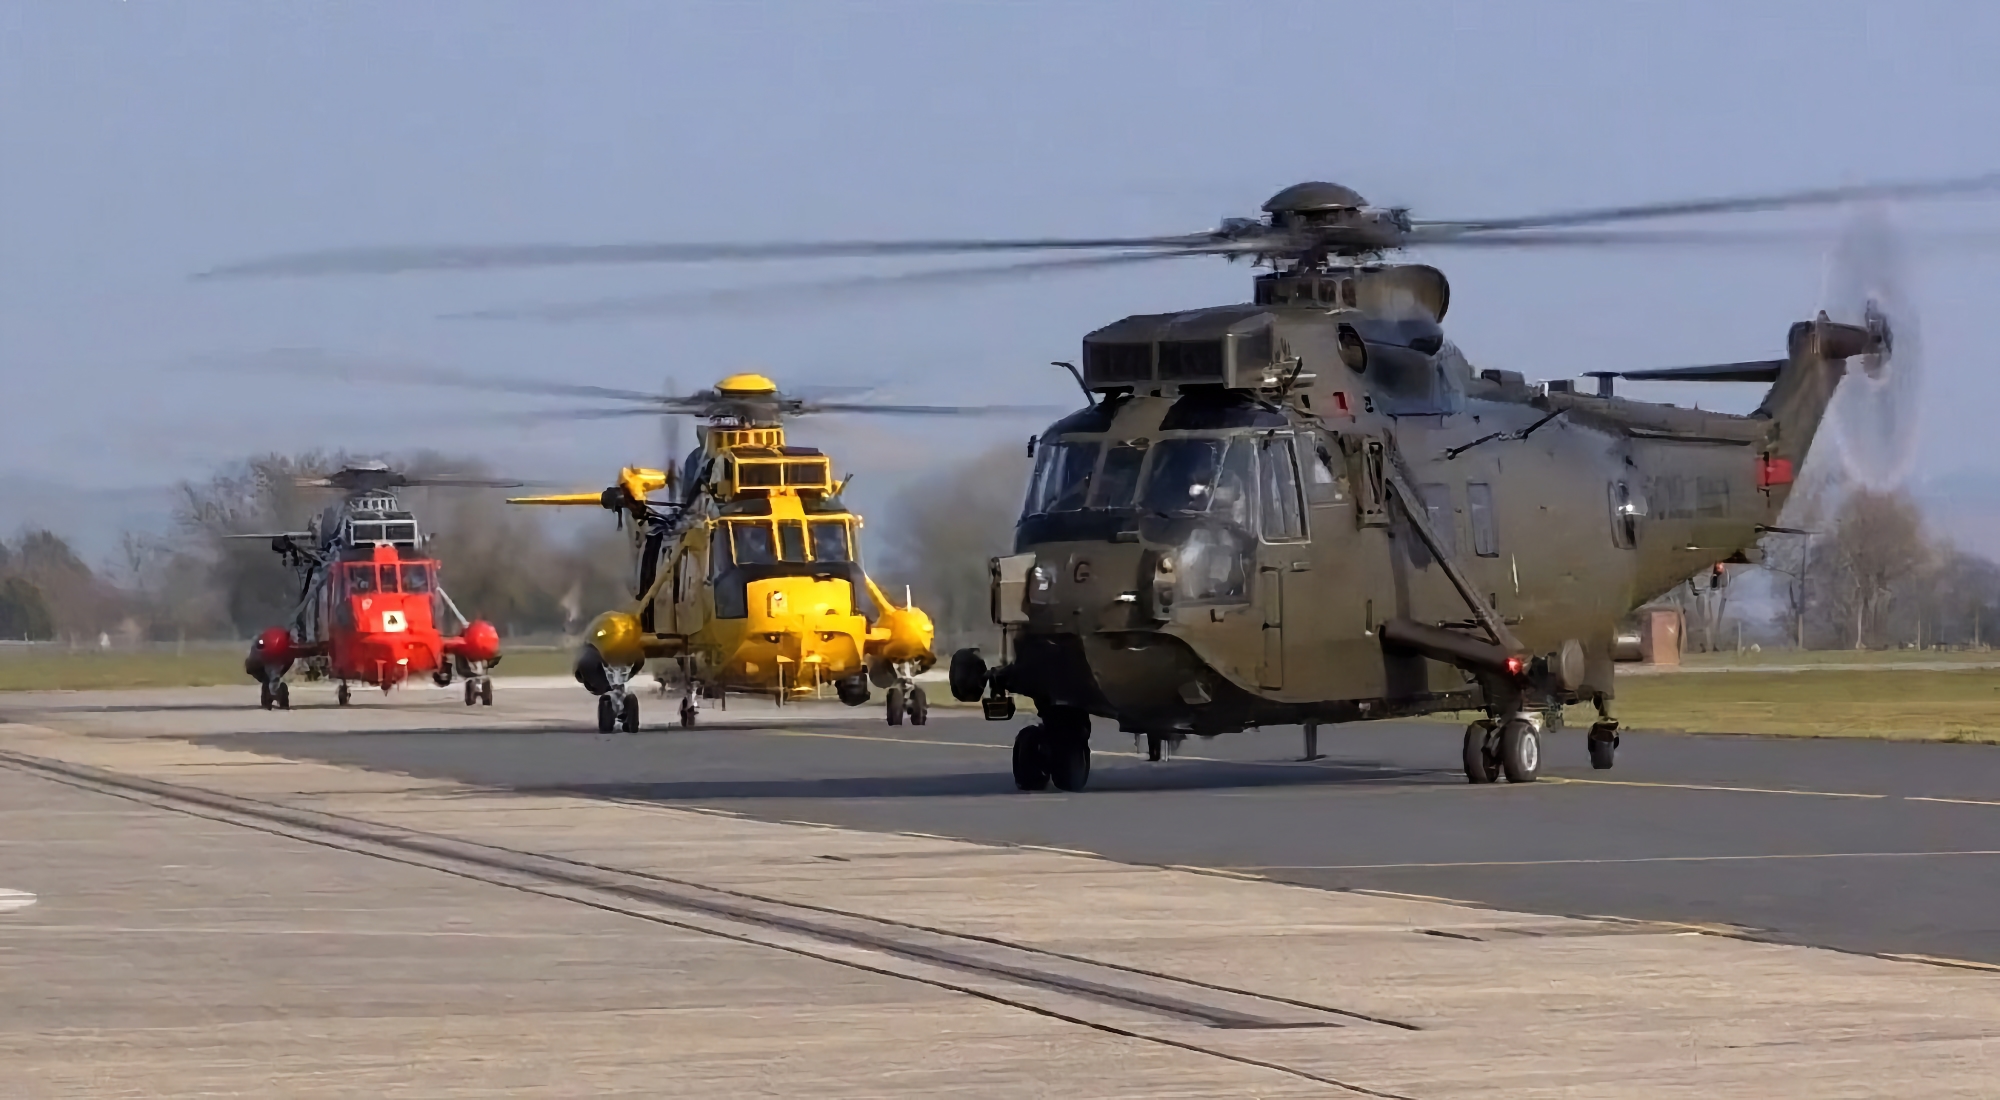 Ukraine received the British Sikorsky S-61 Sea King helicopter for search and rescue operations